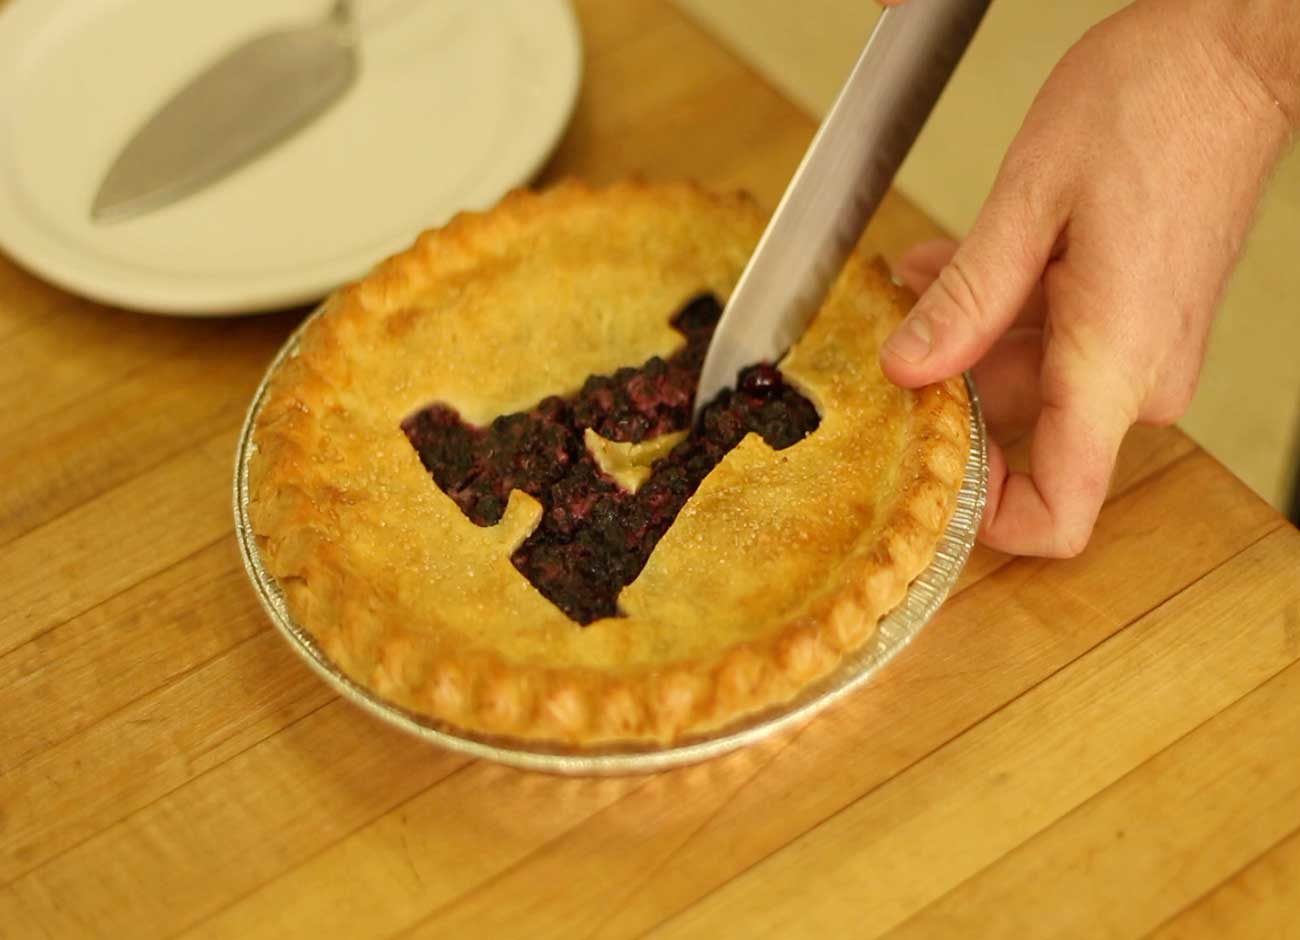 blueberry pie with person cutting an A into top crust